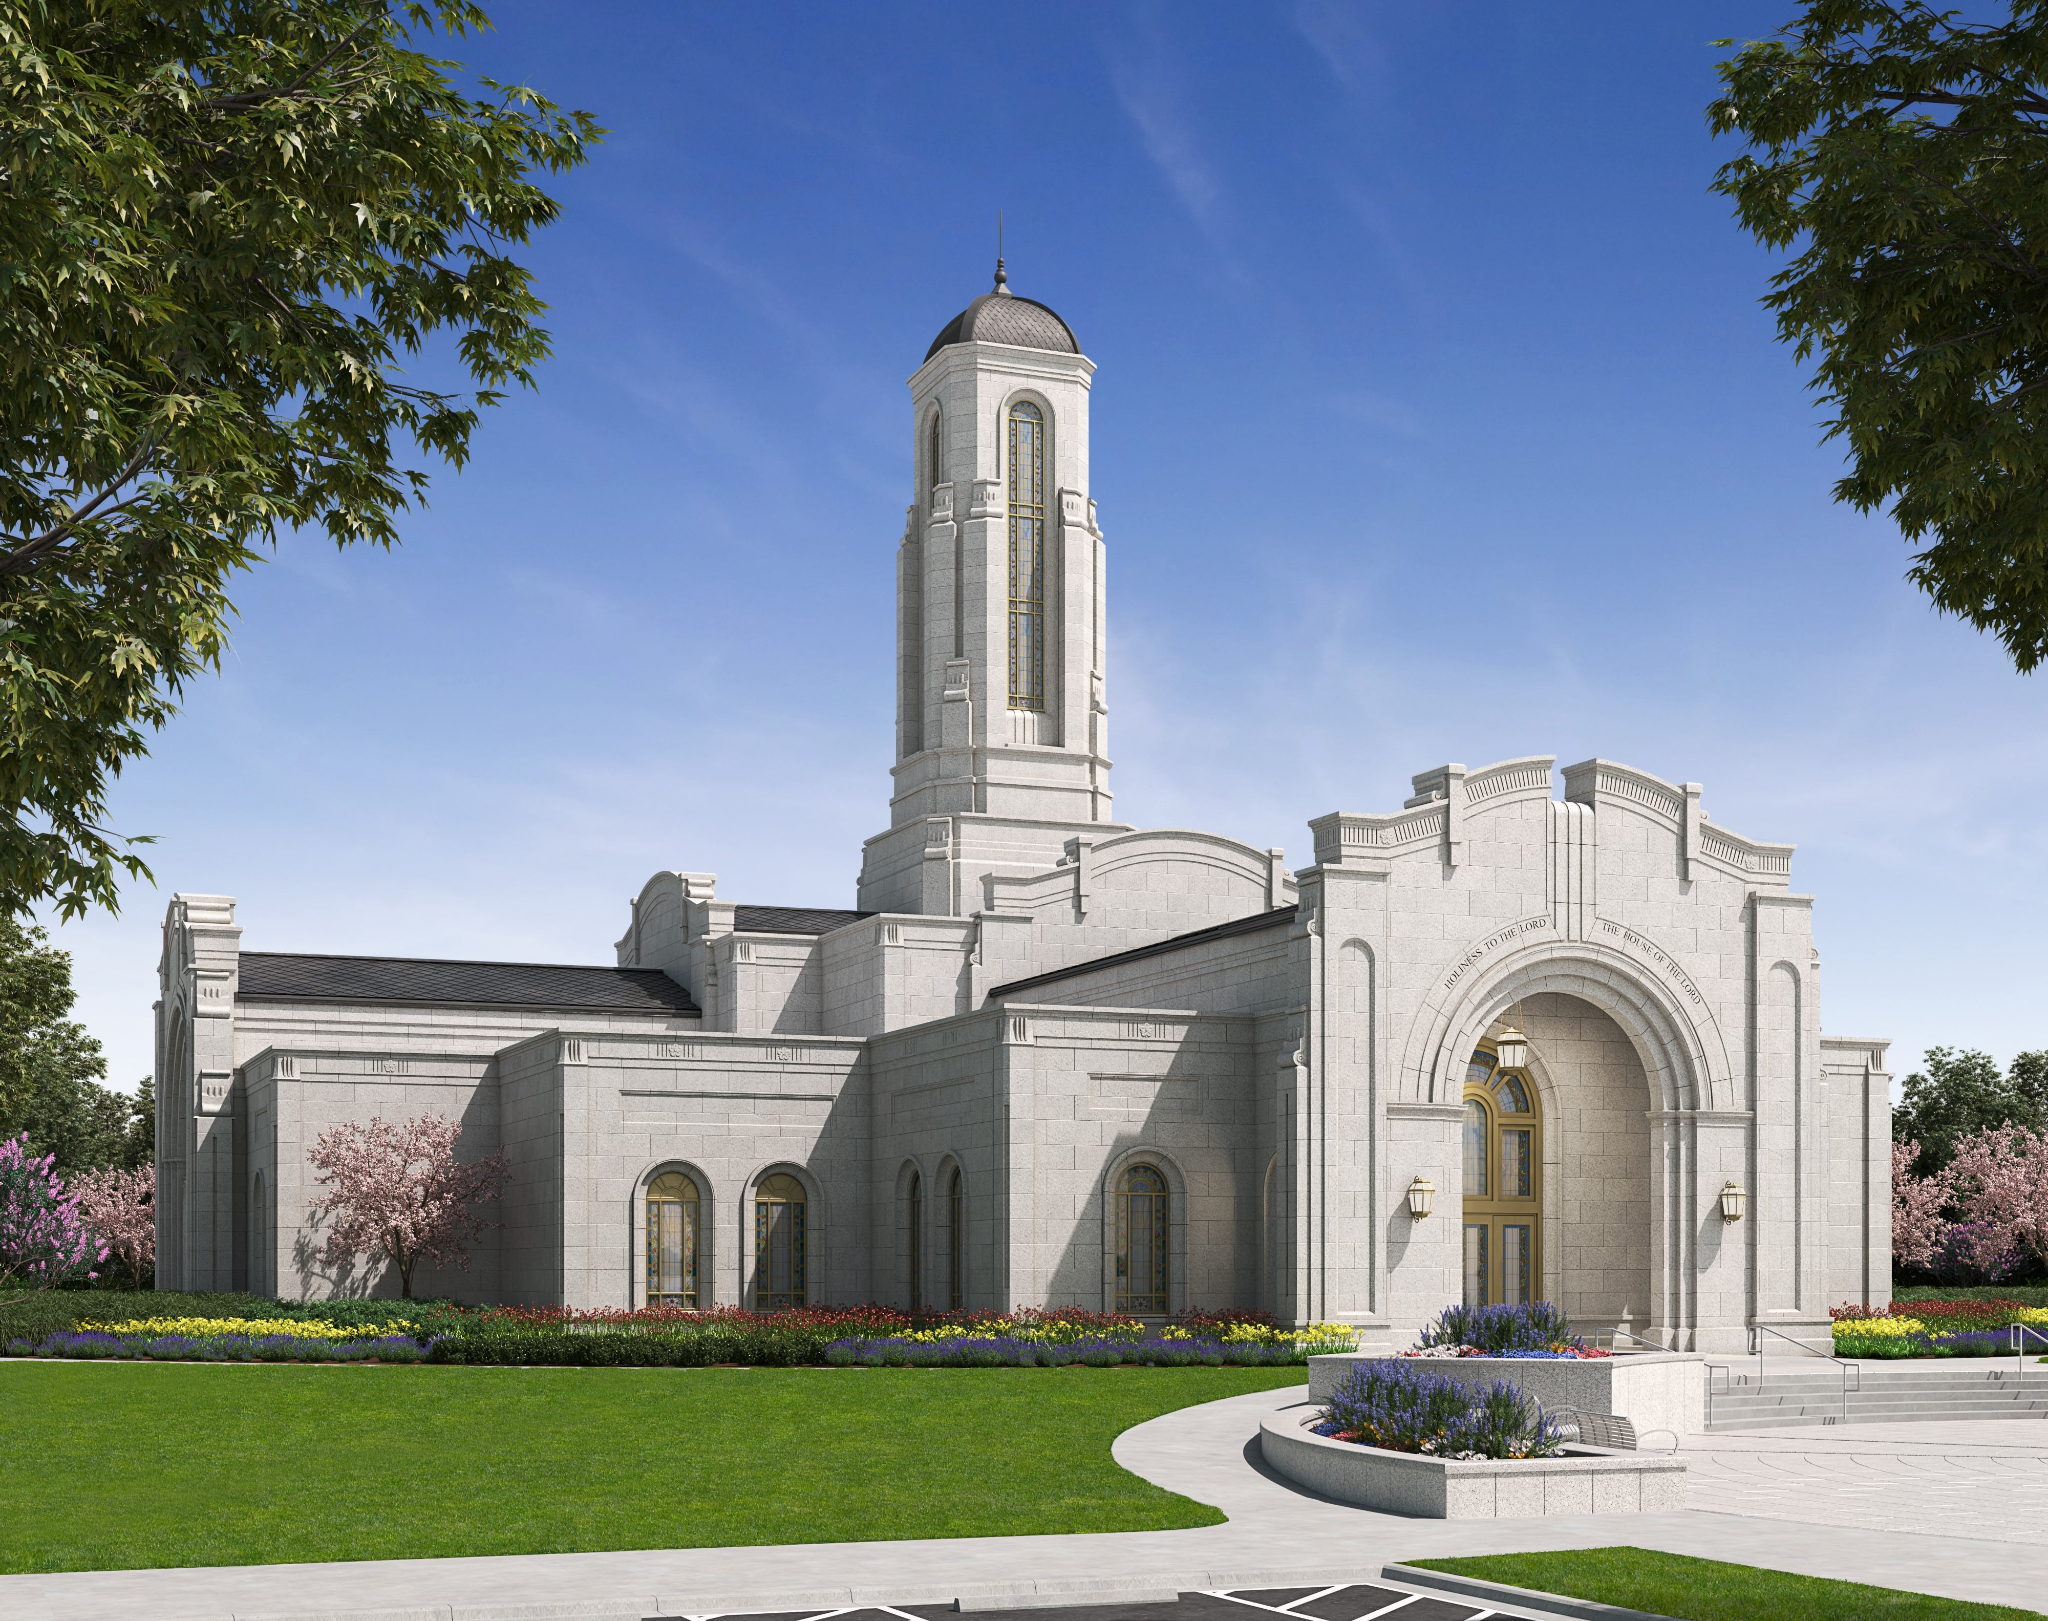 Exterior image of the Modesto California Temple. Photo credit: The Church of Jesus Christ of Latter...